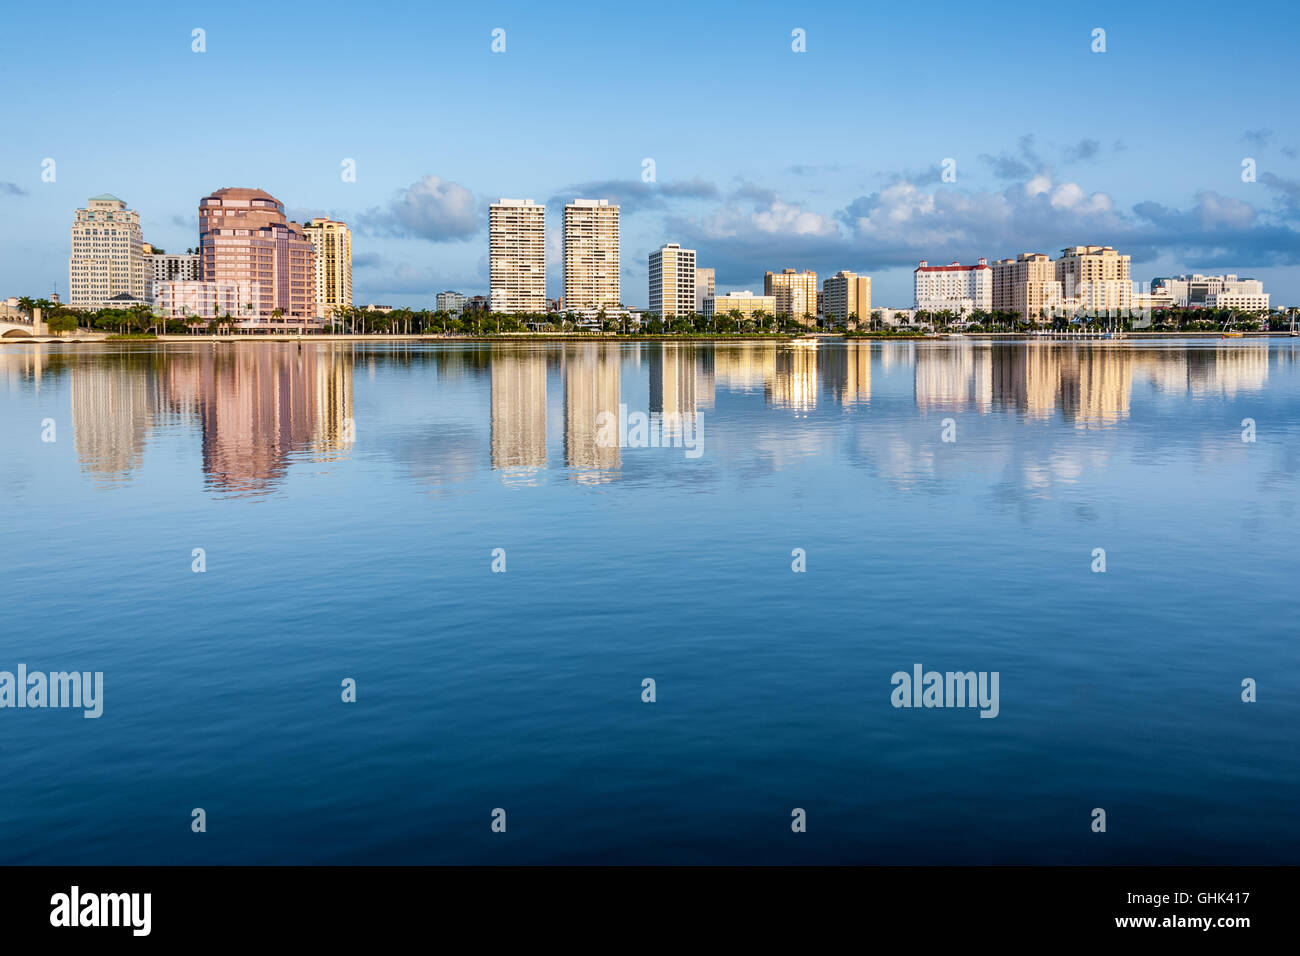 West Palm Beach skyline from Palm Beach's Lake Trail at sunrise along the Intracoastal Waterway in Palm Beach County, Florida. Stock Photo